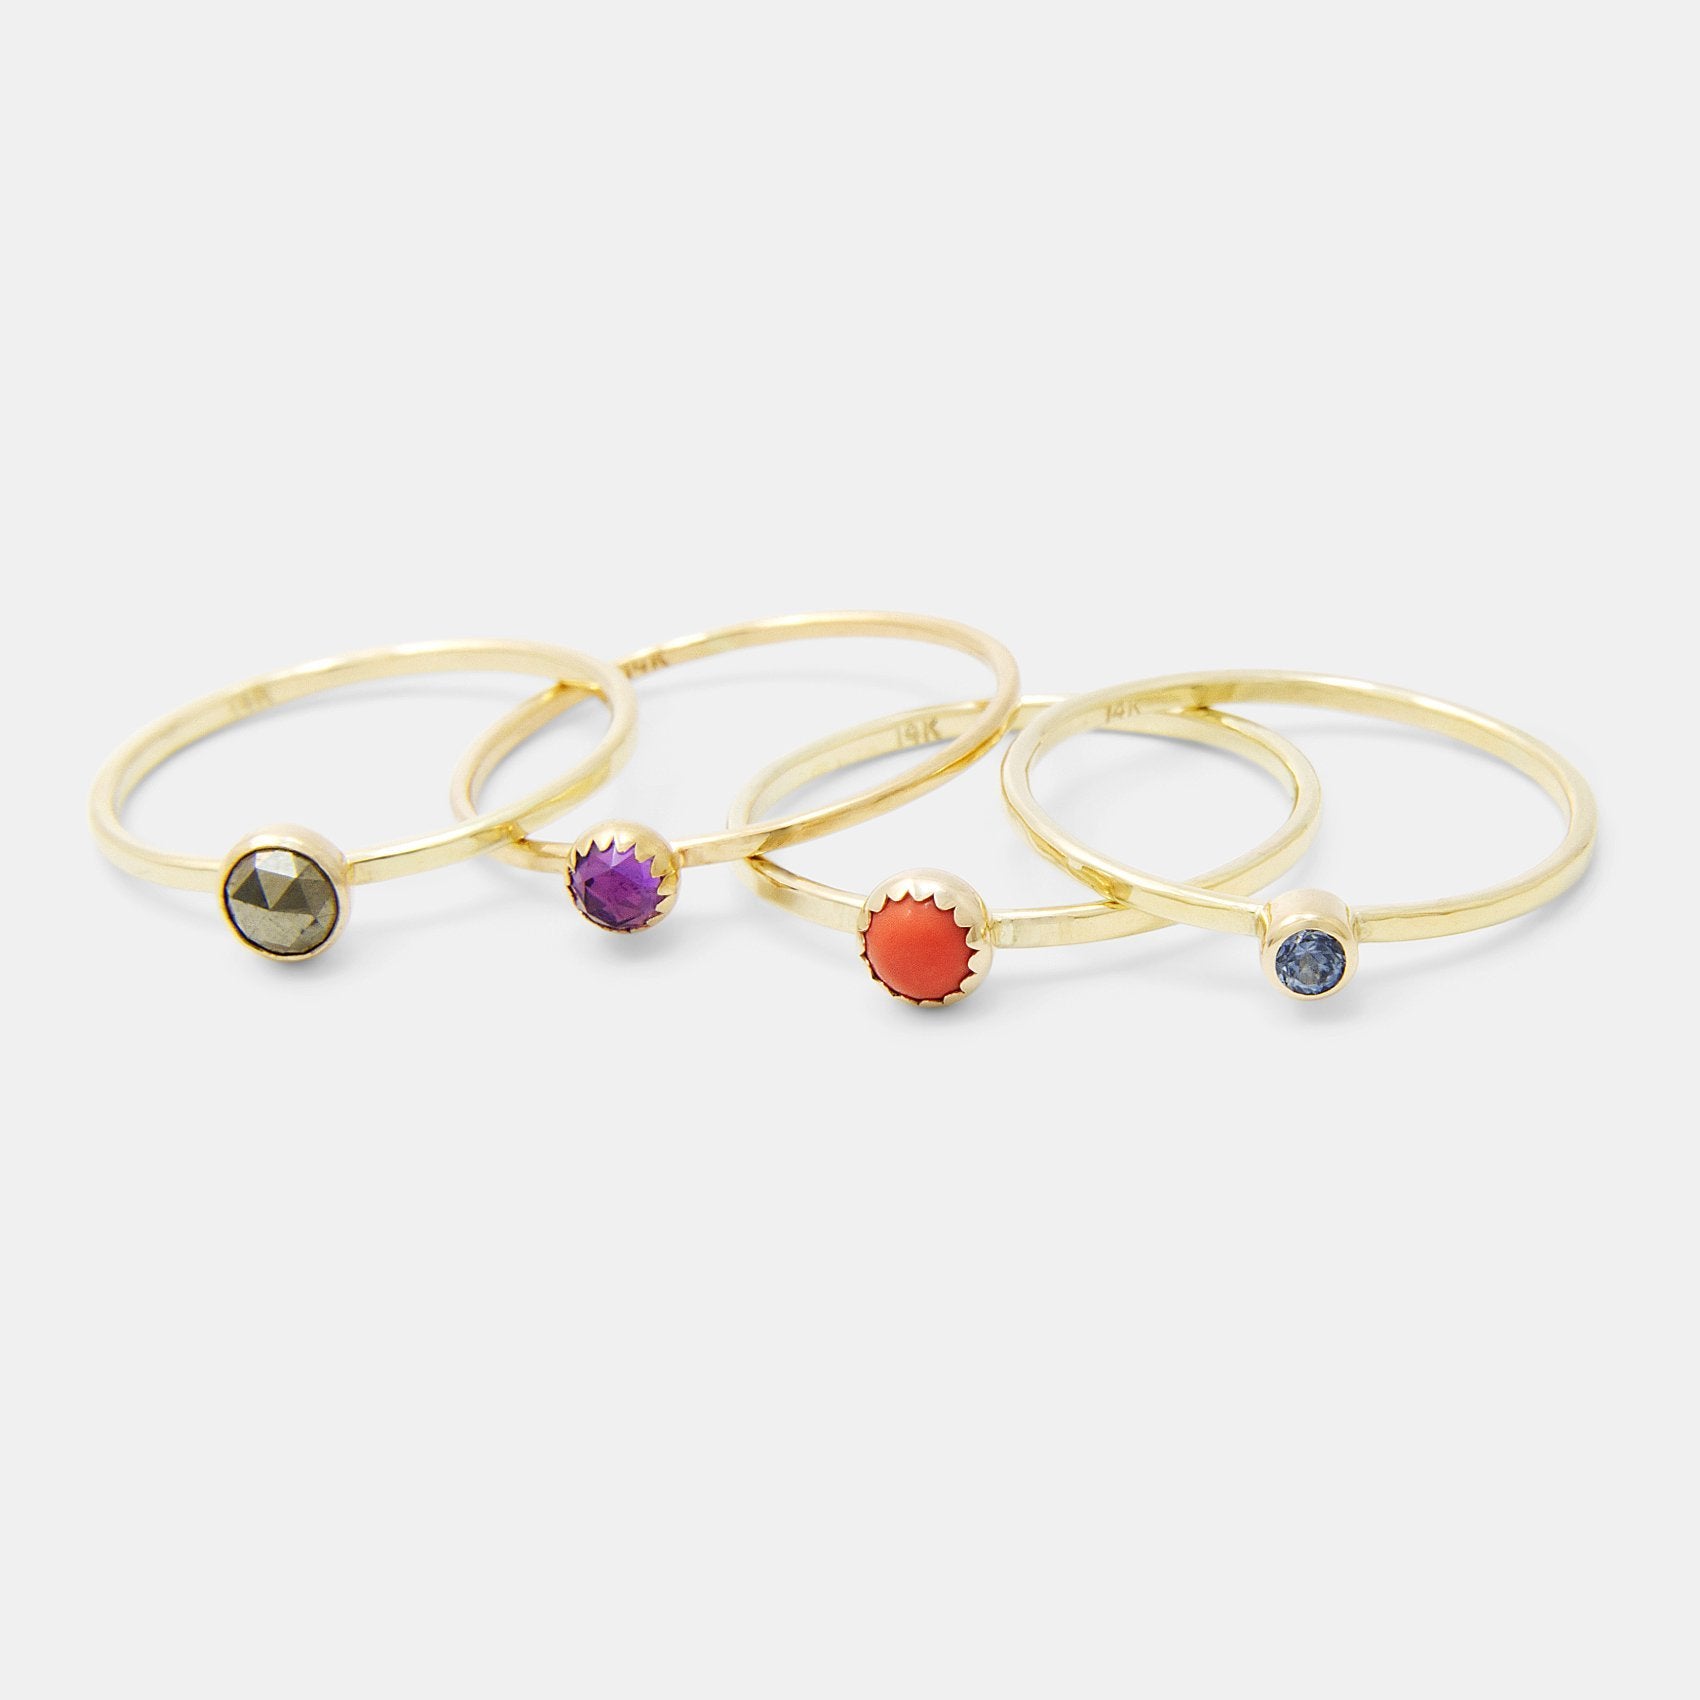 Coral gem & solid gold stacking ring - Simone Walsh Jewellery Australia